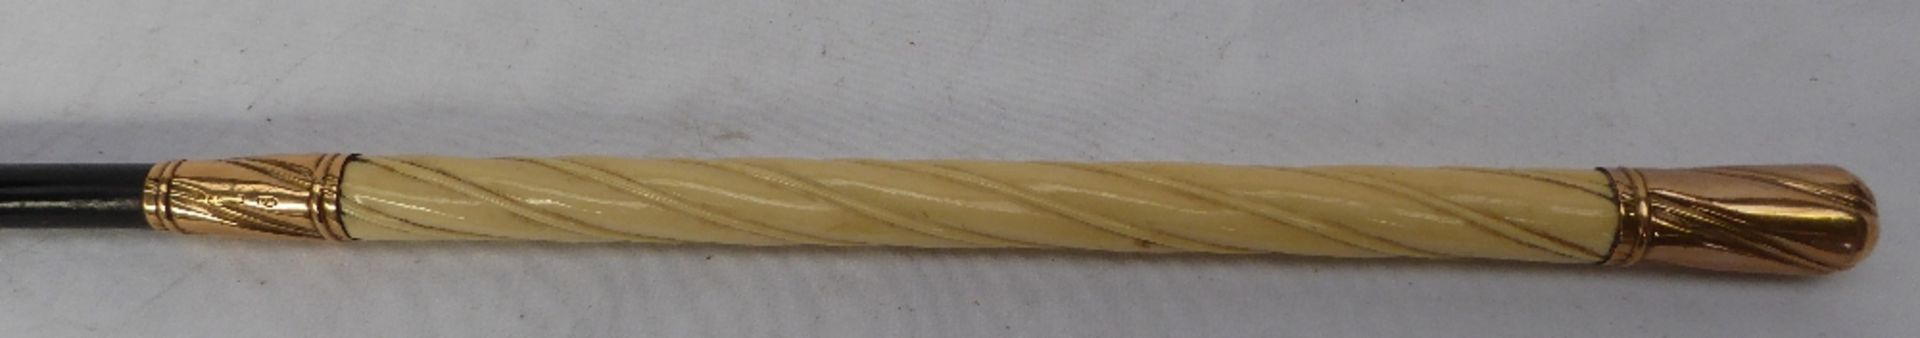 Black holly driving whip with carved ivory handle and 15ct gold mounts hallmarked London 1901 - Image 2 of 2